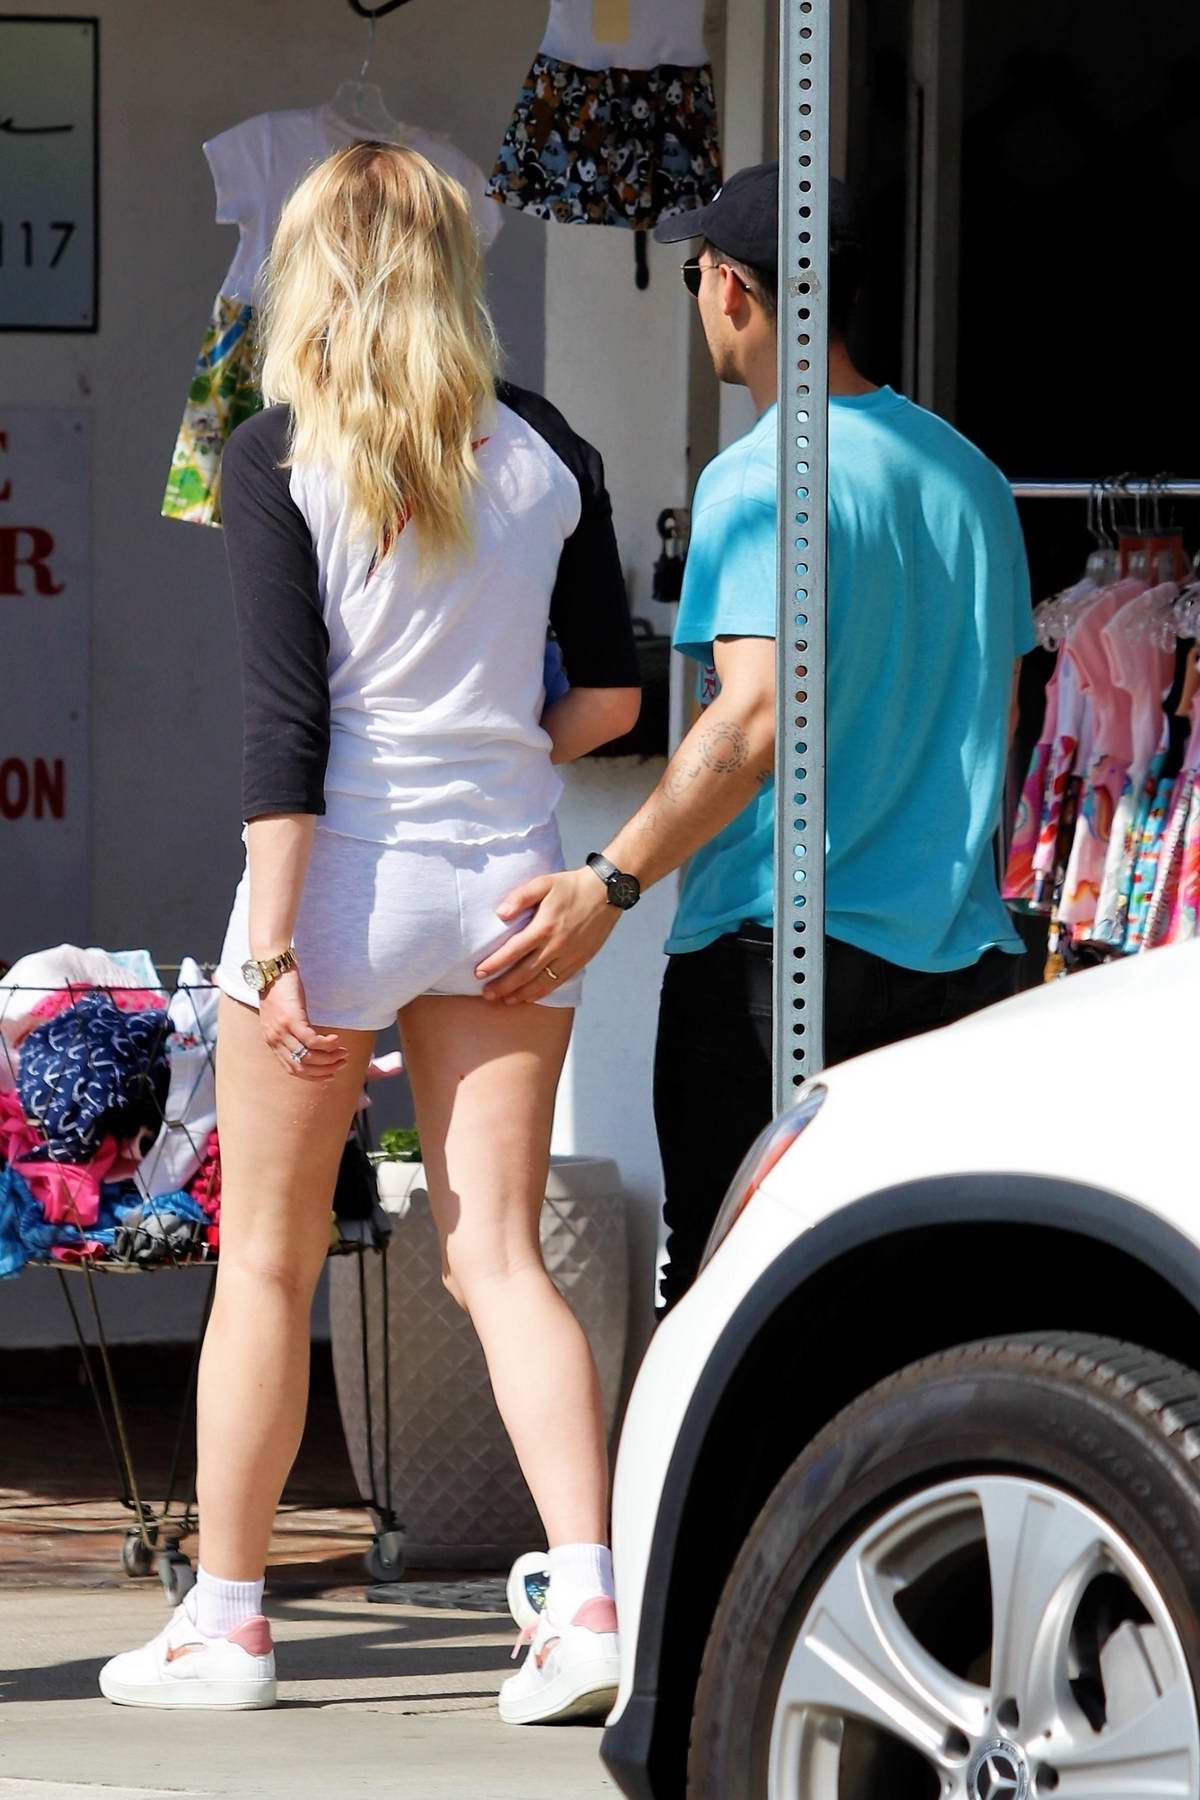 sophie-turner-shows-off-her-long-legs-in-shorts-while-out-for-lunch-with-joe-jonas-in-studio-city-california-060320_11.jpg